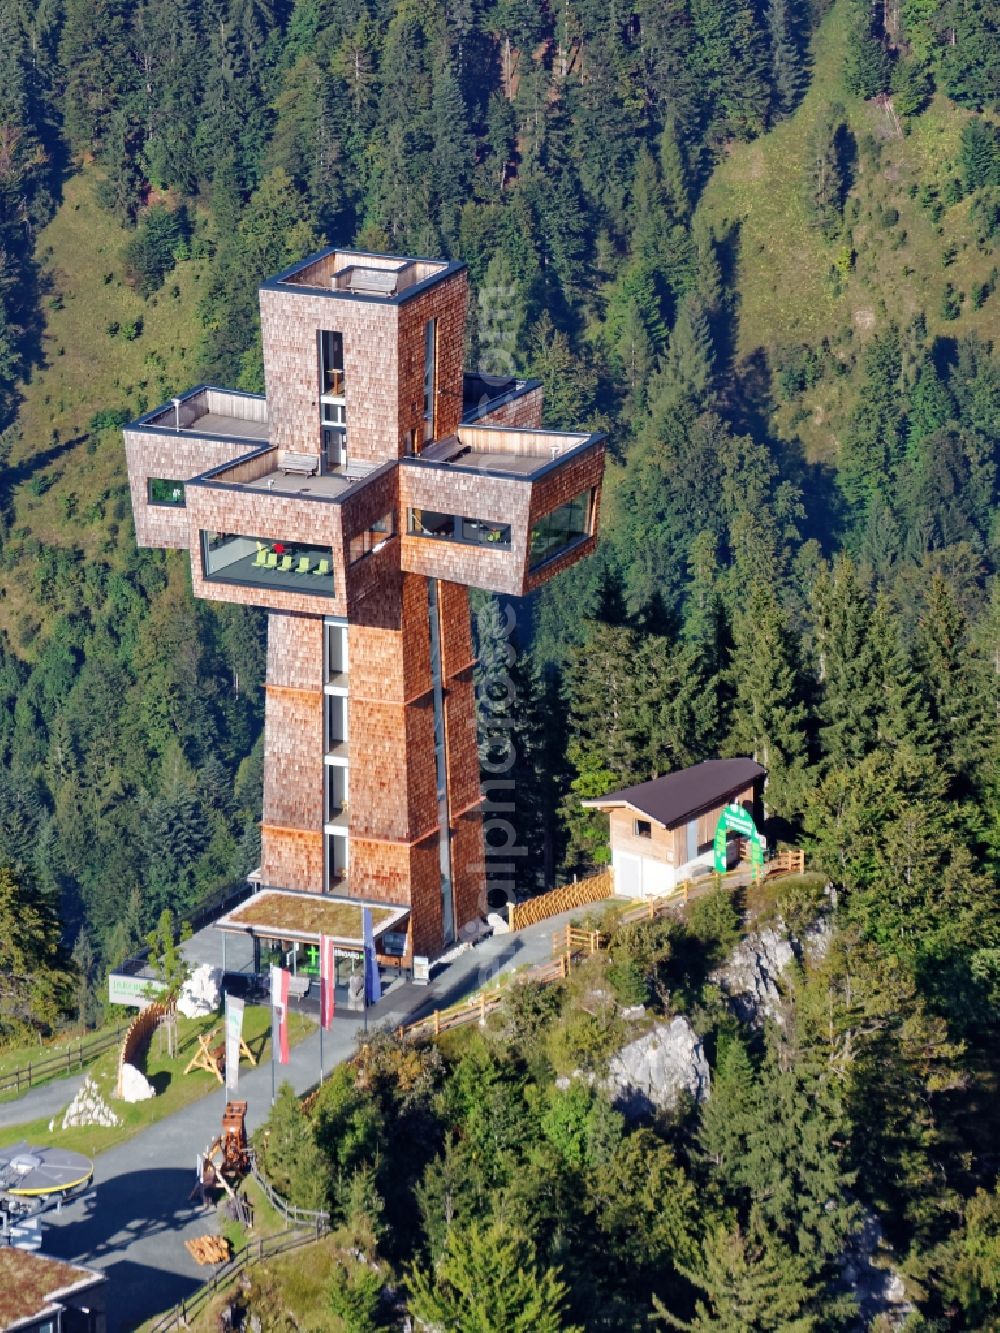 Aerial image Sankt Ulrich am Pillersee - The Jakobskreuz at the summit of the Buchensteinwand in Pillerseetal near St. Jakob in Tyrol, Austria. The summit cross is designed as a cross-shaped building with four arms and includes viewing and exhibition rooms with a panoramic viewing platform